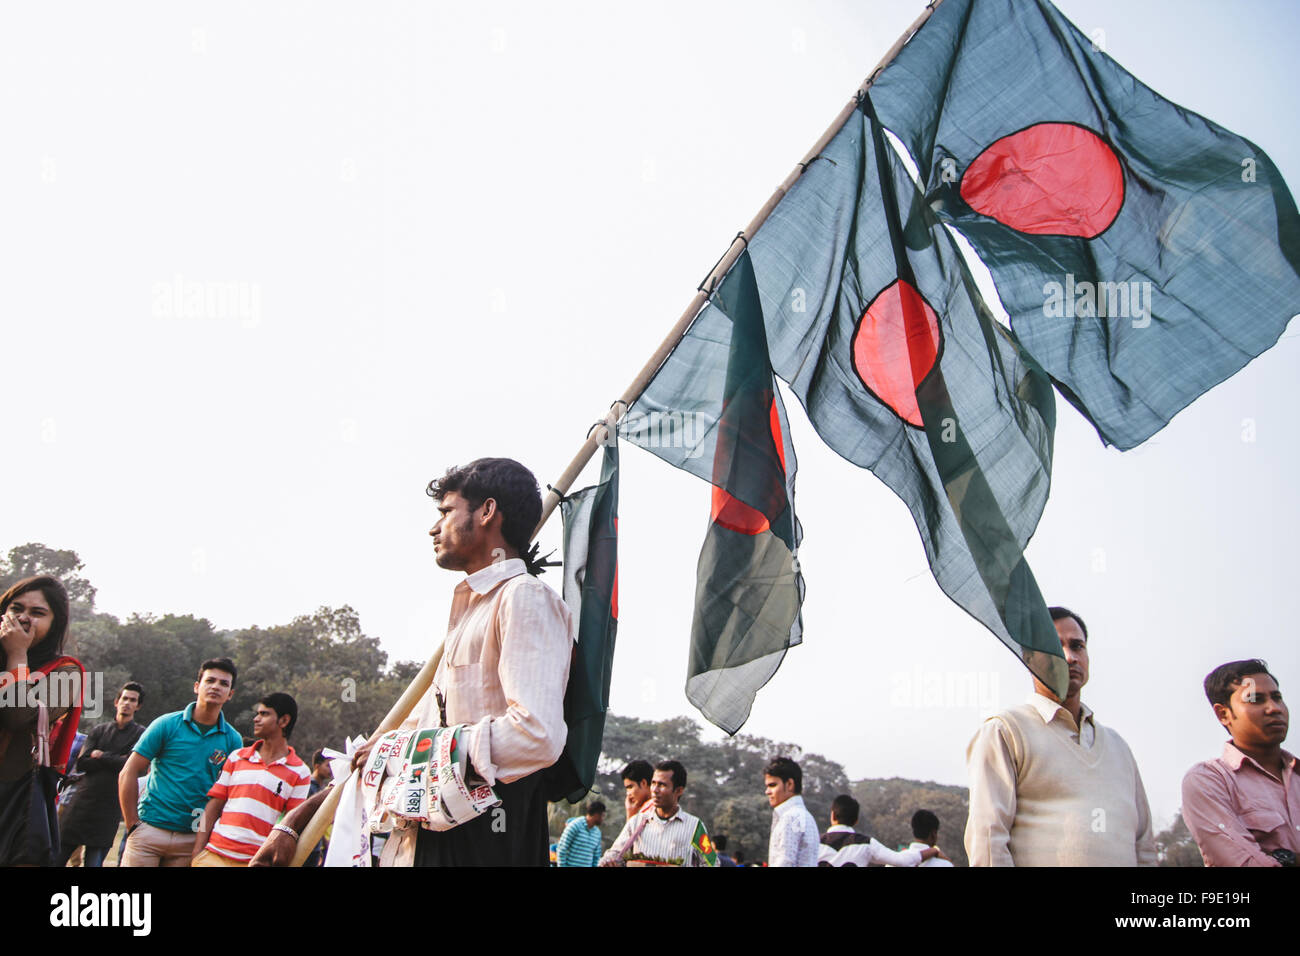 Dhaka, Bangladesh. 16th Dec, 2015. A flag vendor selling Bangladesh's national flag. Bangladeshi people observing Victory day. On 16 December 1971 Bangladesh gained victory after 9 month long liberation war against Pakistan. Credit:  Belal Hossain Rana/Pacific Press/Alamy Live News Stock Photo